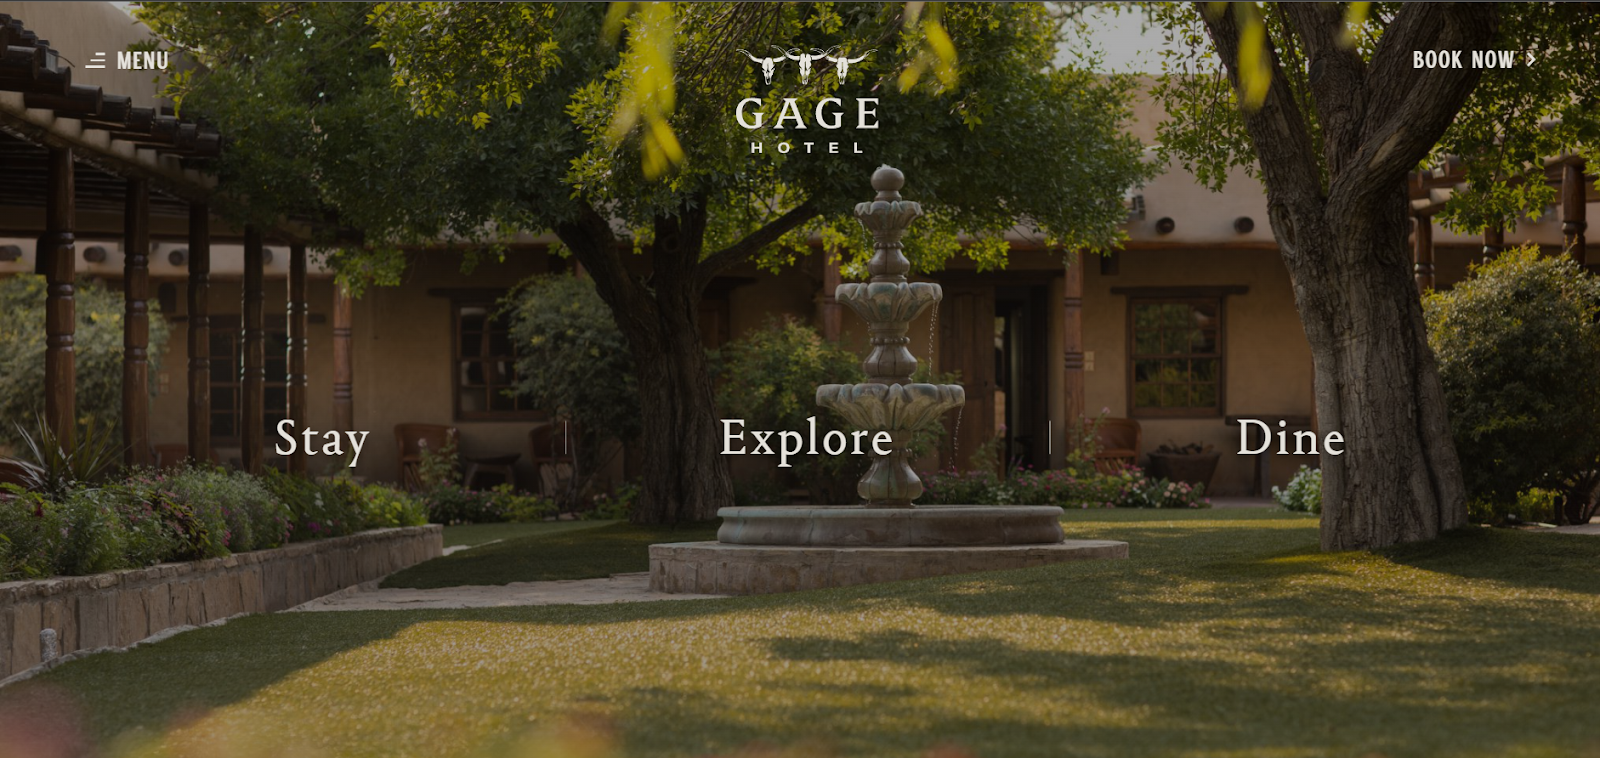 hotel website examples, Gage Hotel